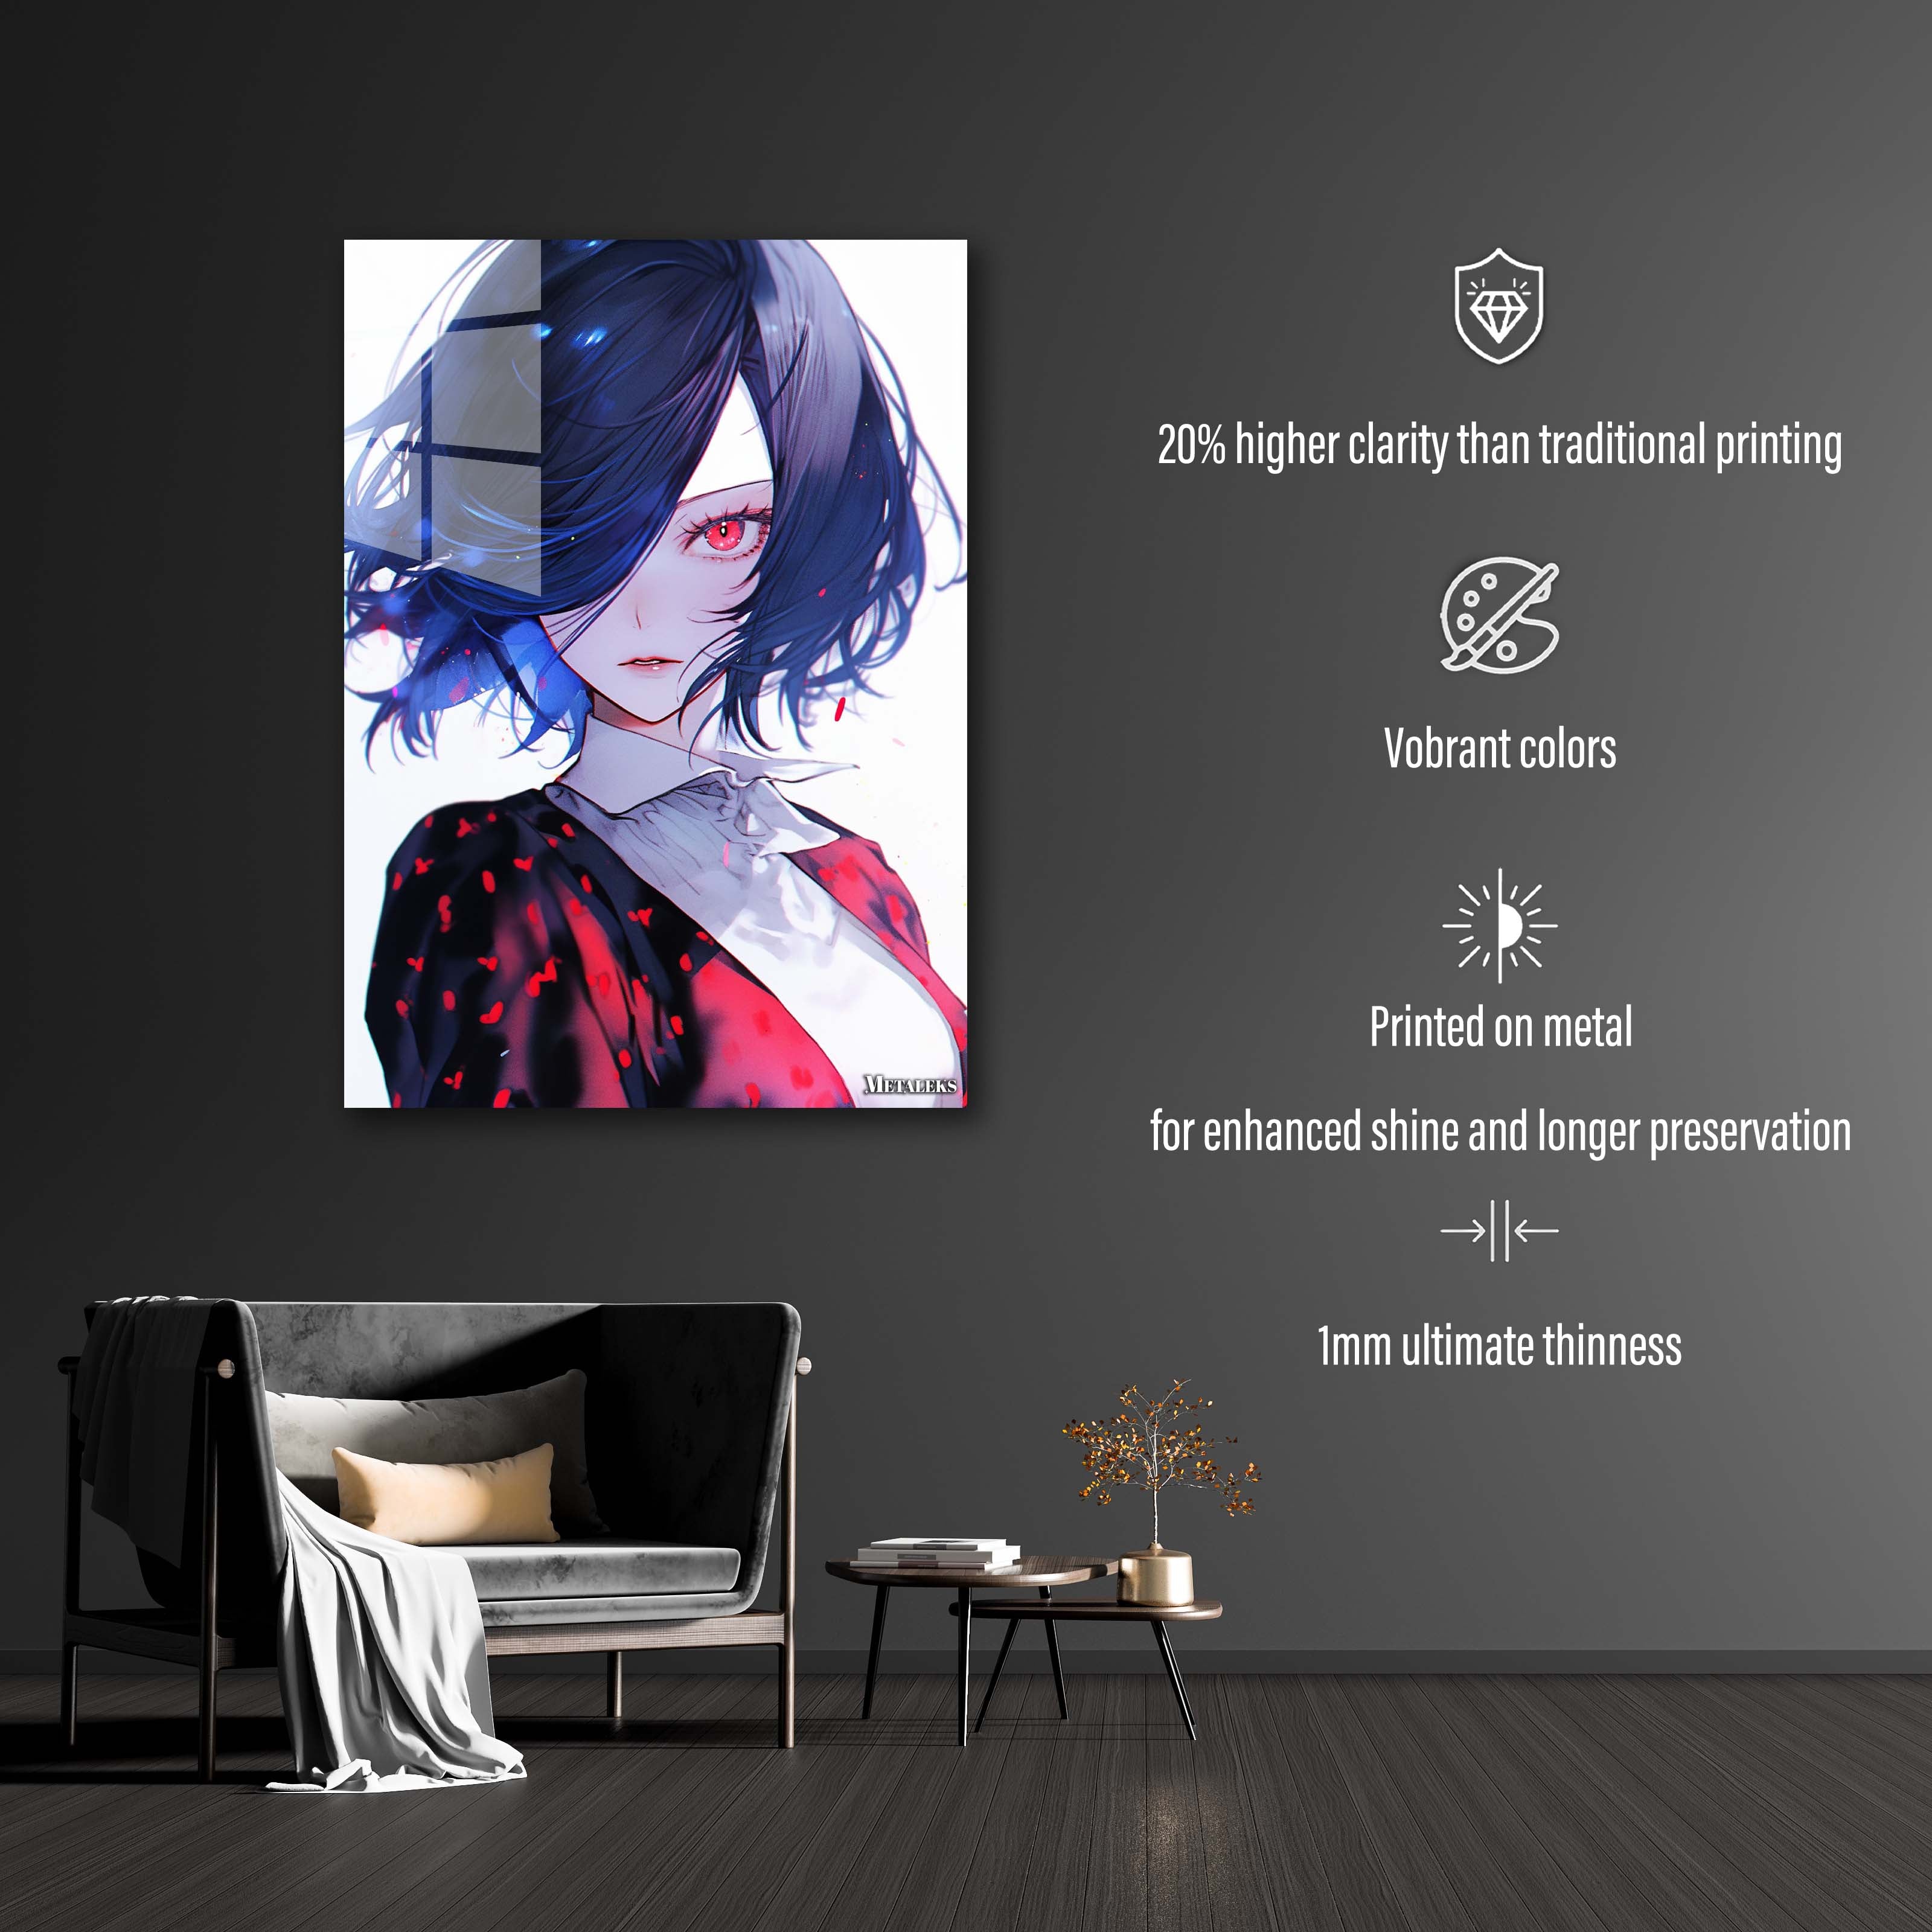 Tokyo Twilight_ Touka's Unseen Journeys-designed by @theanimecrossover